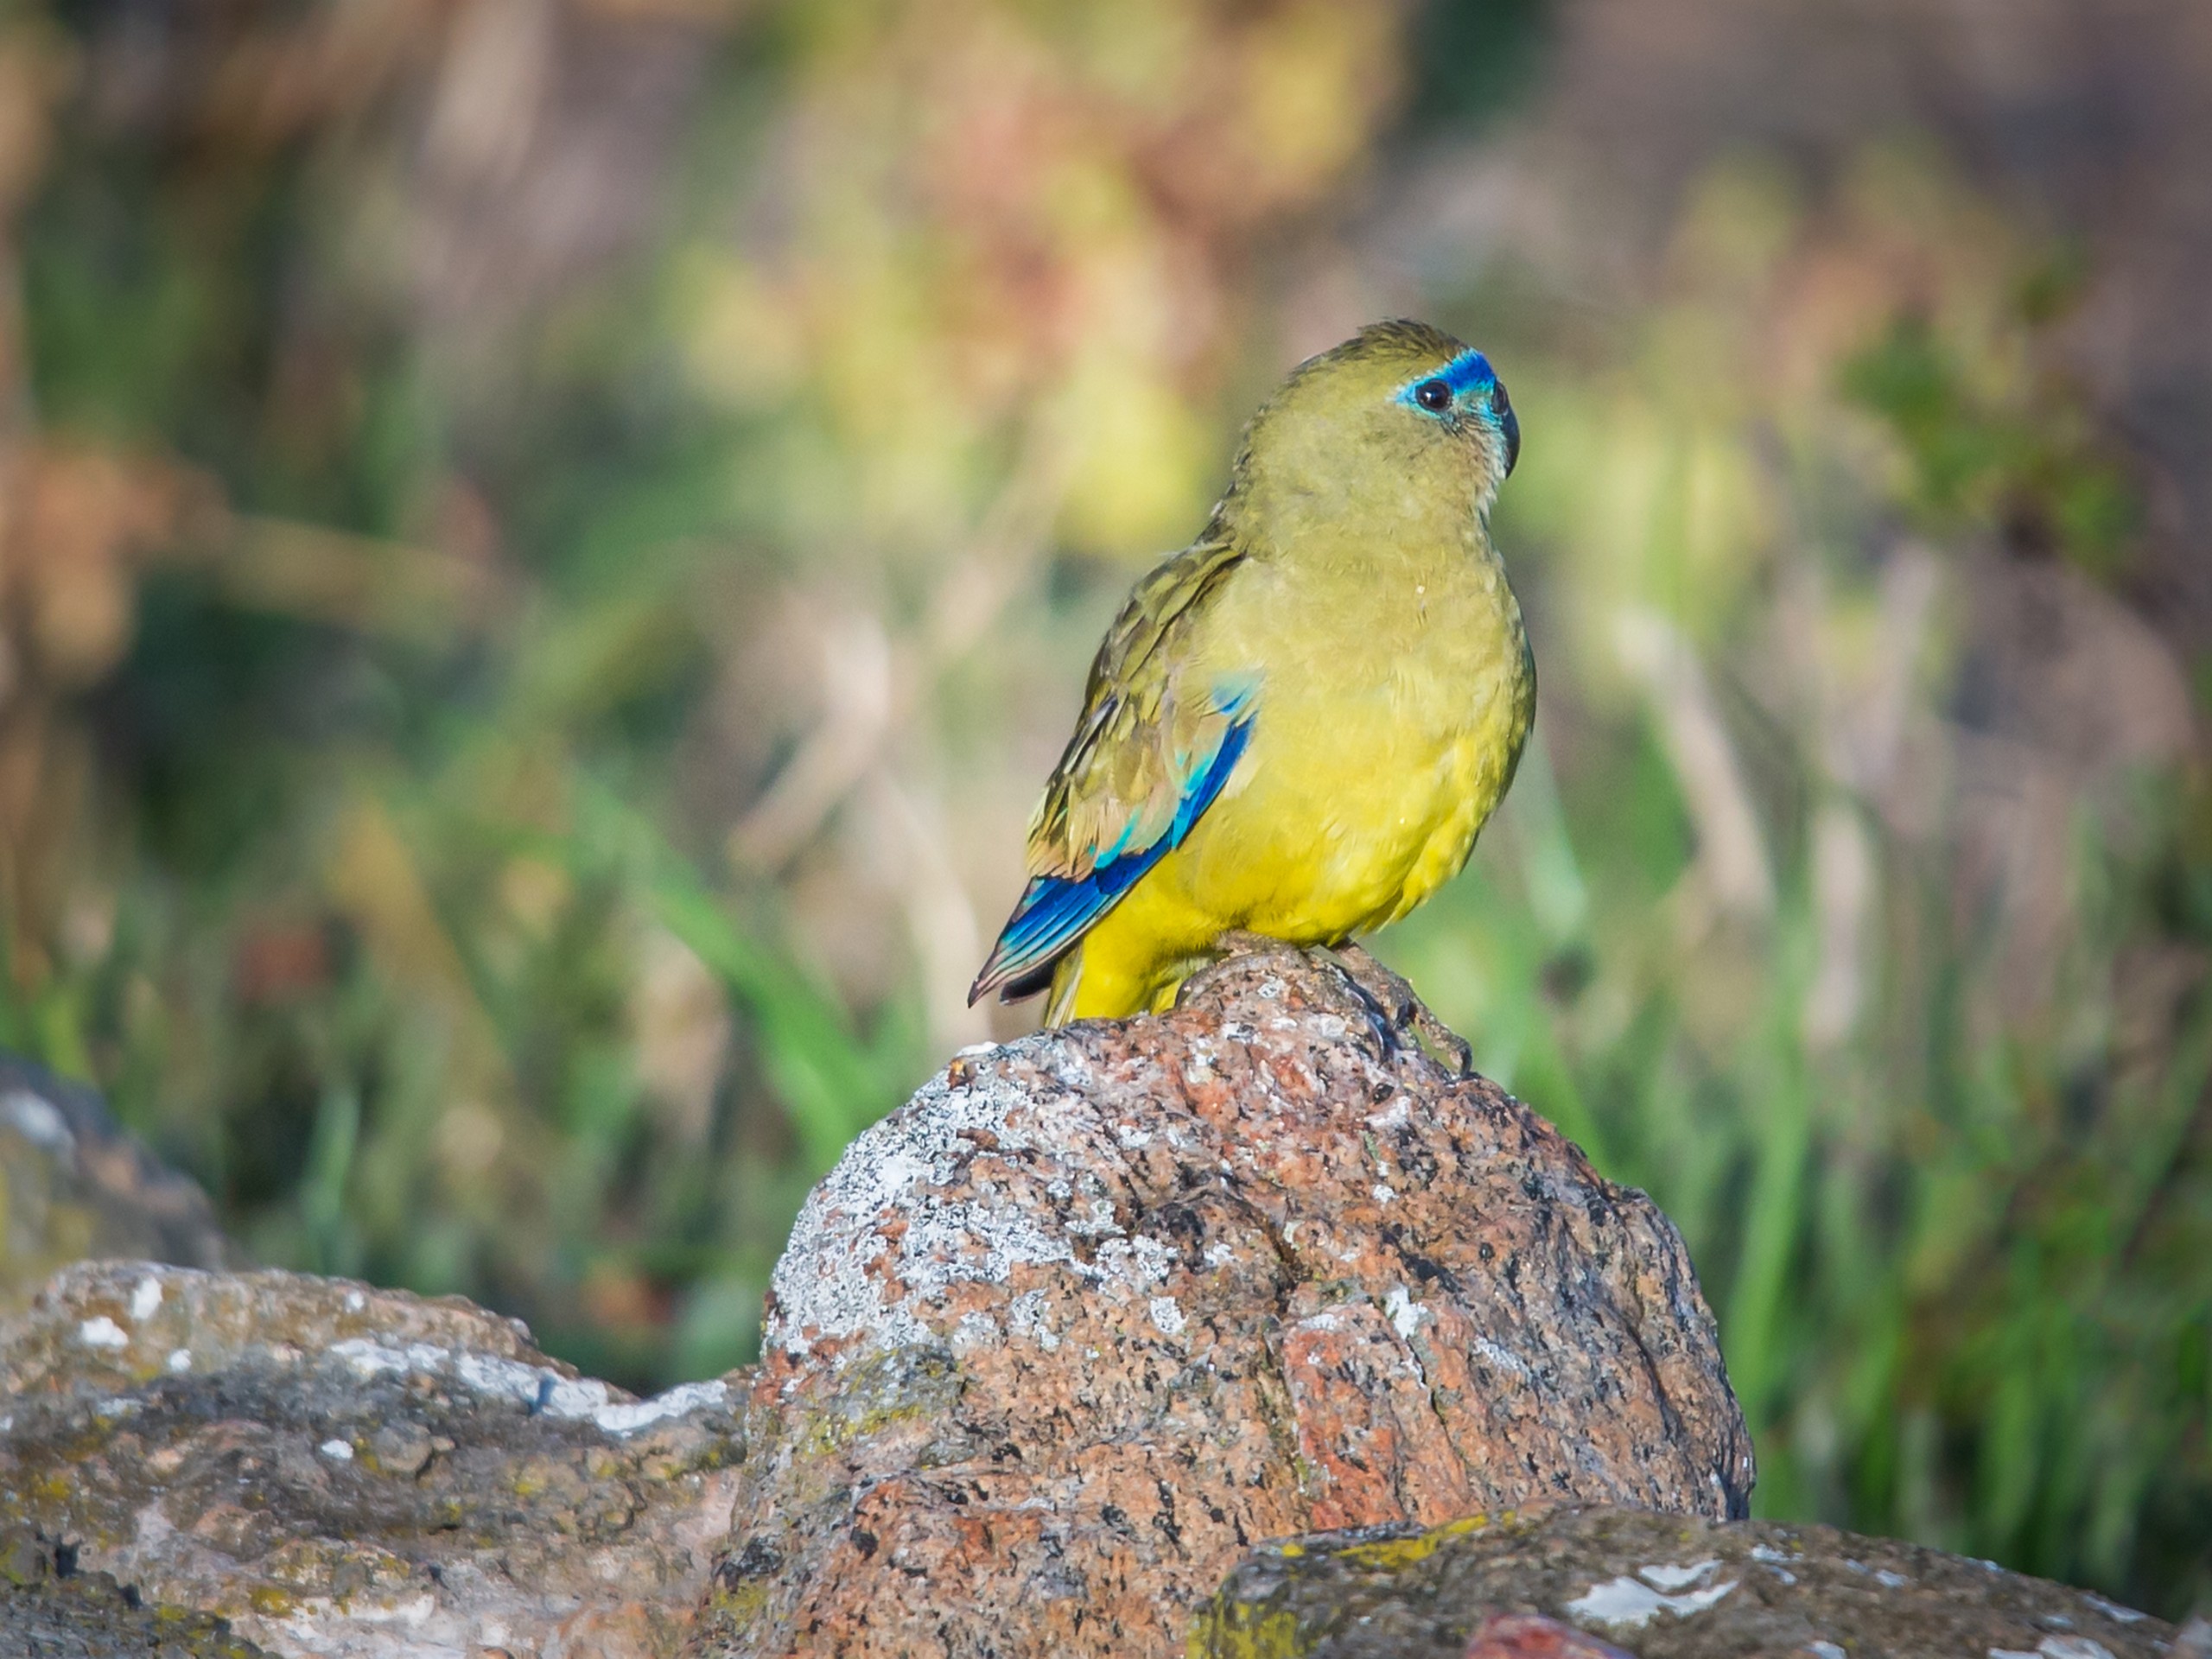 Rock Parrot seen while on a guided birdwatching tour in South Australia